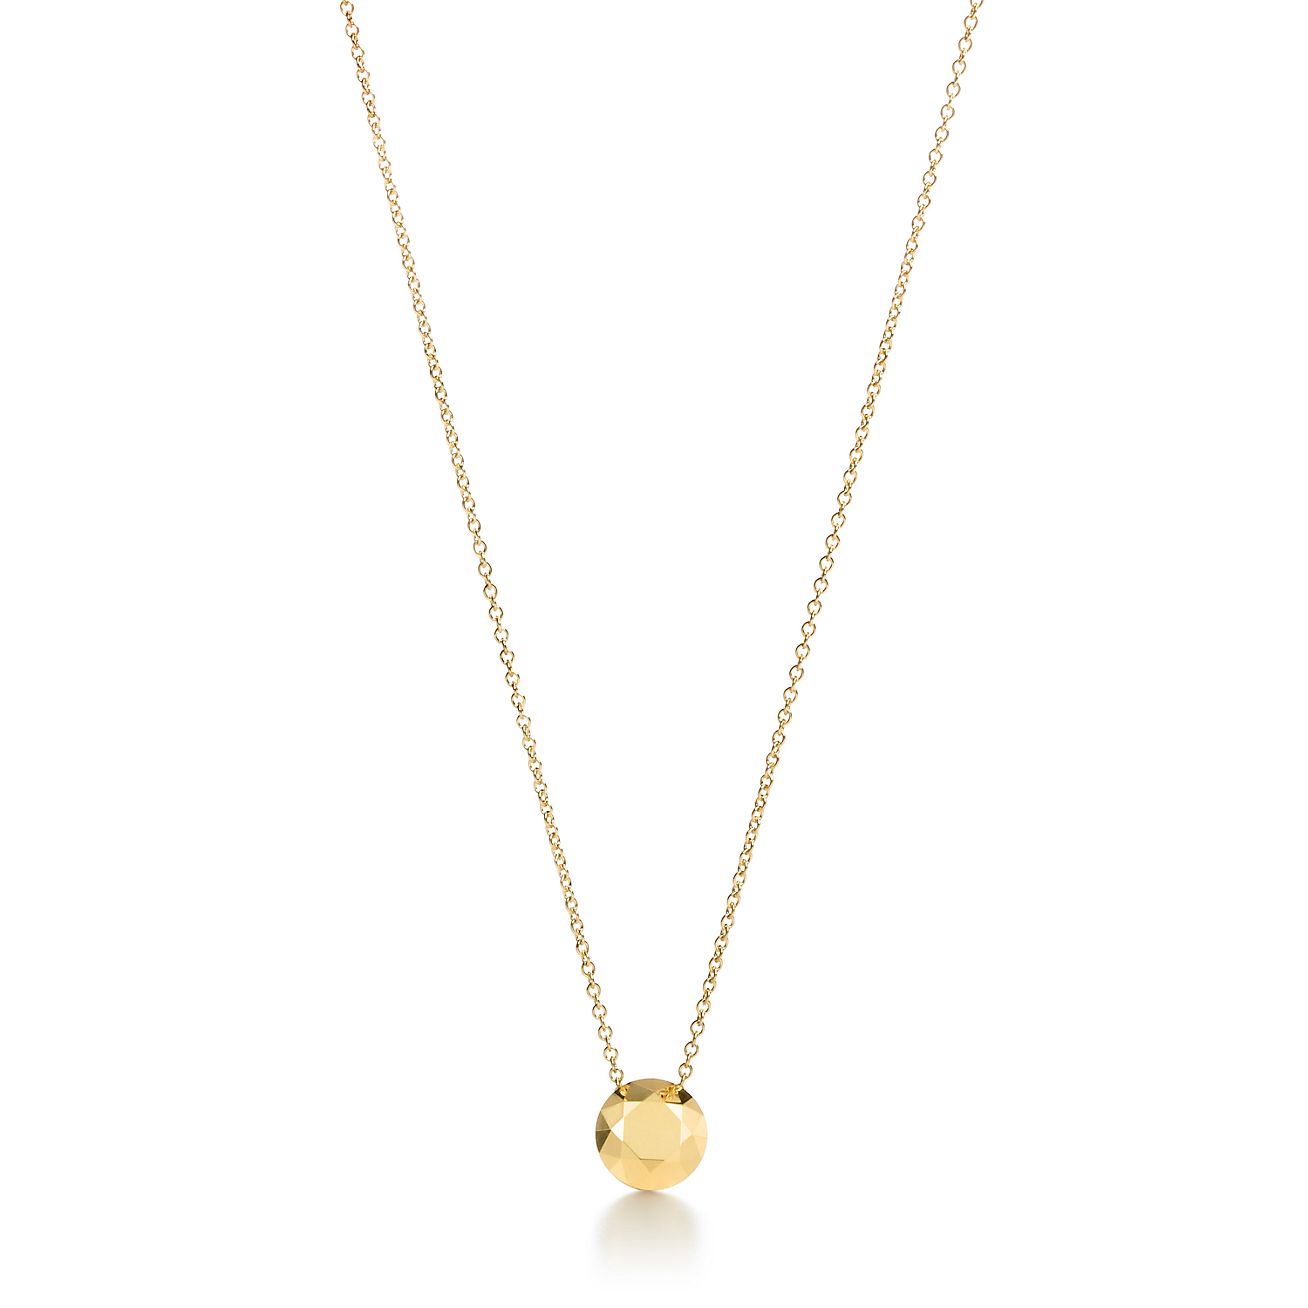 Elsa Peretti® Two Carat faceted pendant in 18k gold. | Tiffany & Co.